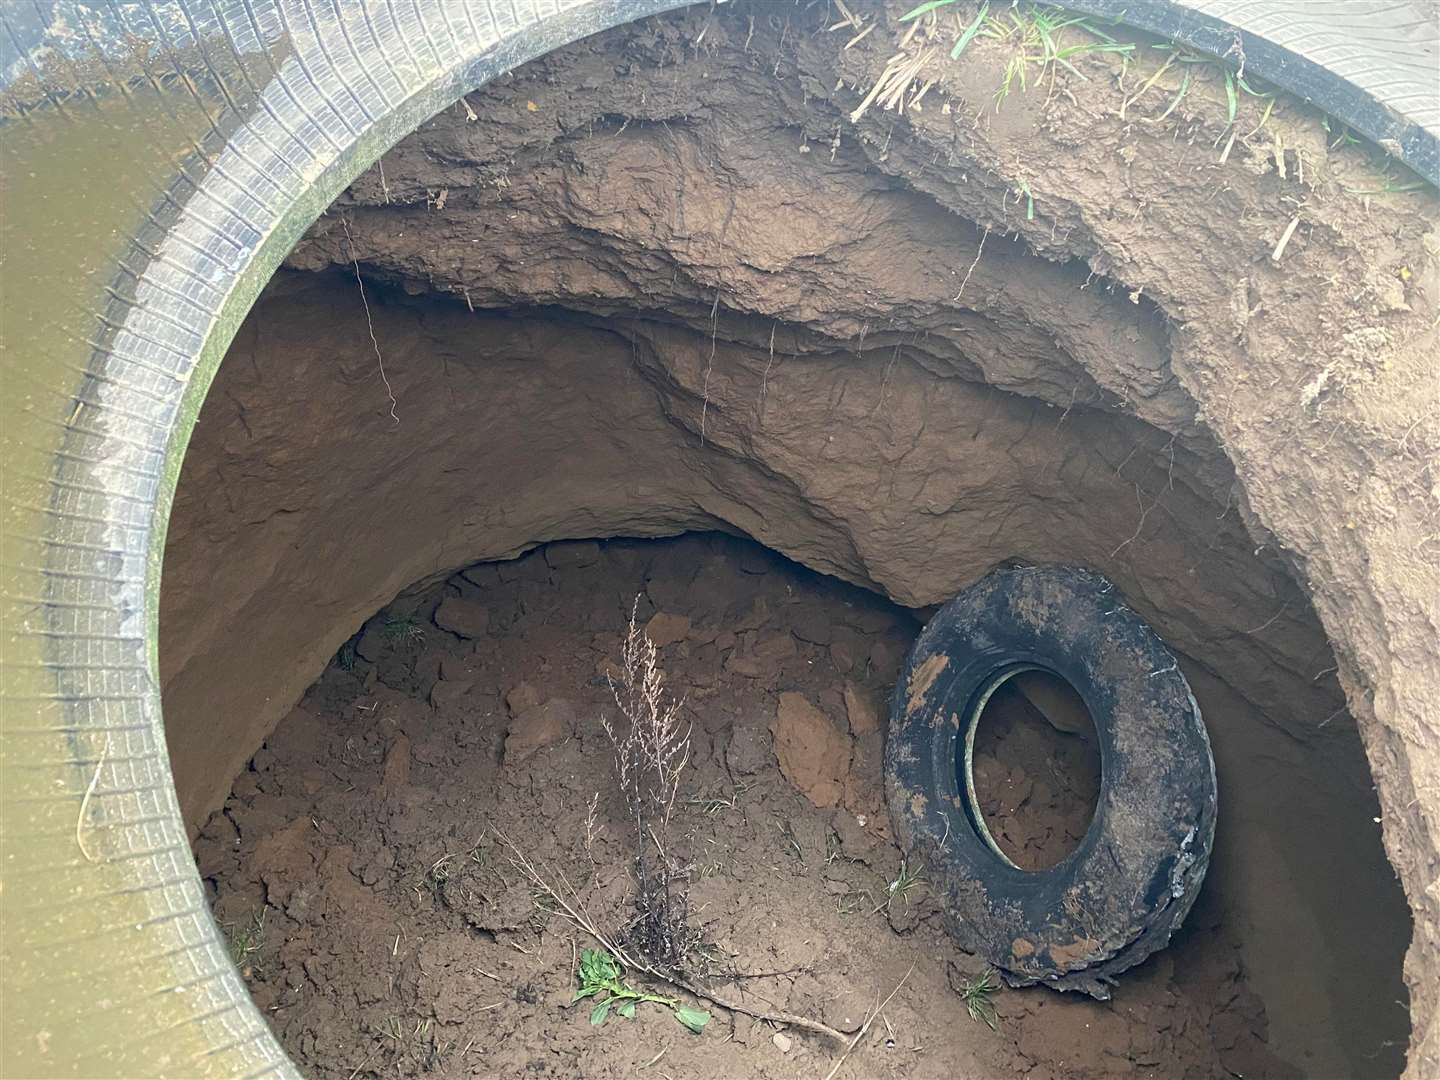 Kent underground search group believe this could be a chalkwell dating back to the 19th century. Picture: Michael Winsor